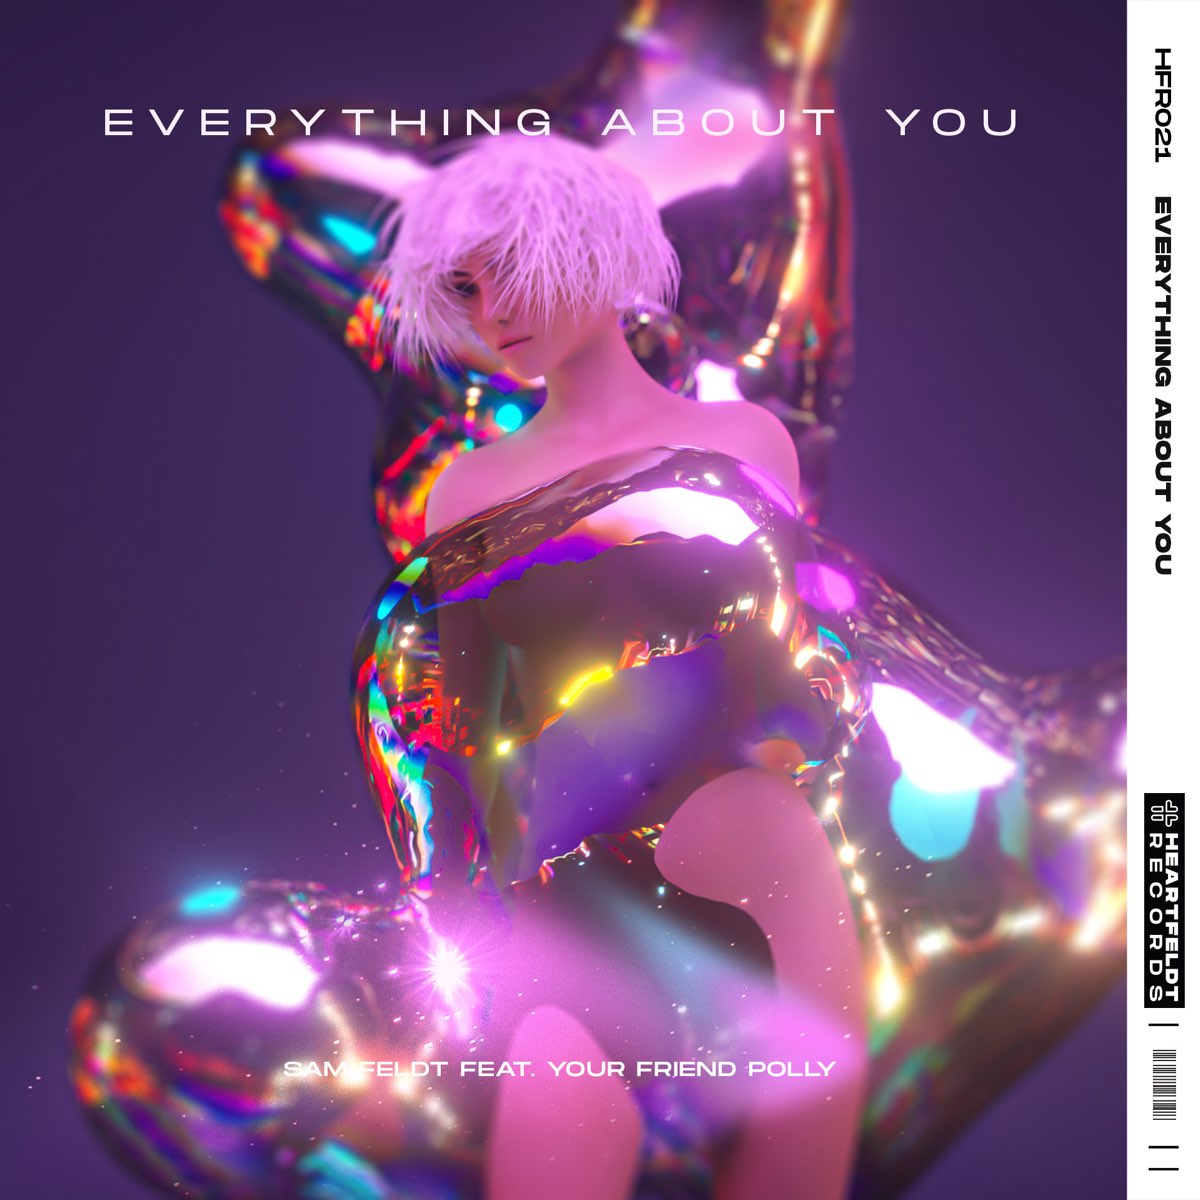 Sam Feldt featuring your friend polly — Everything About You cover artwork